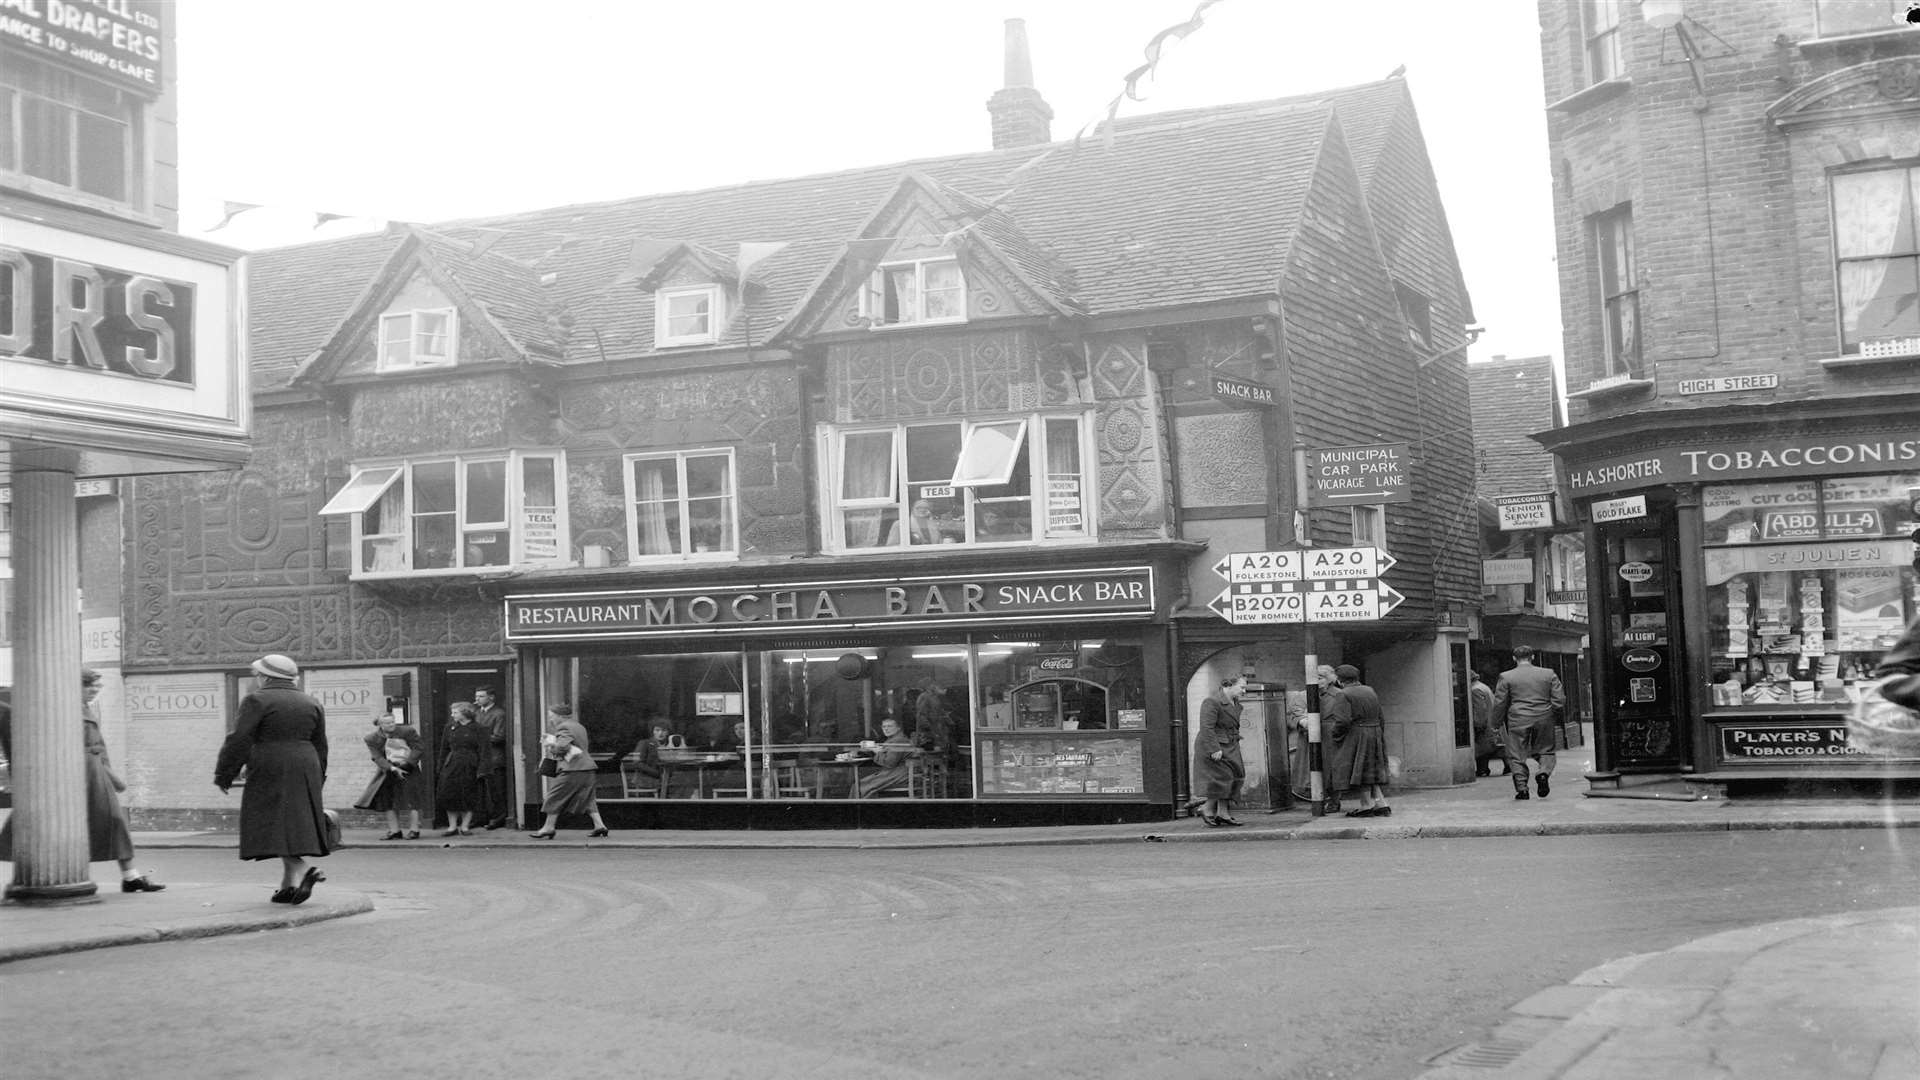 The building in 1957 as Mocha Bar. Credit: Reflections.